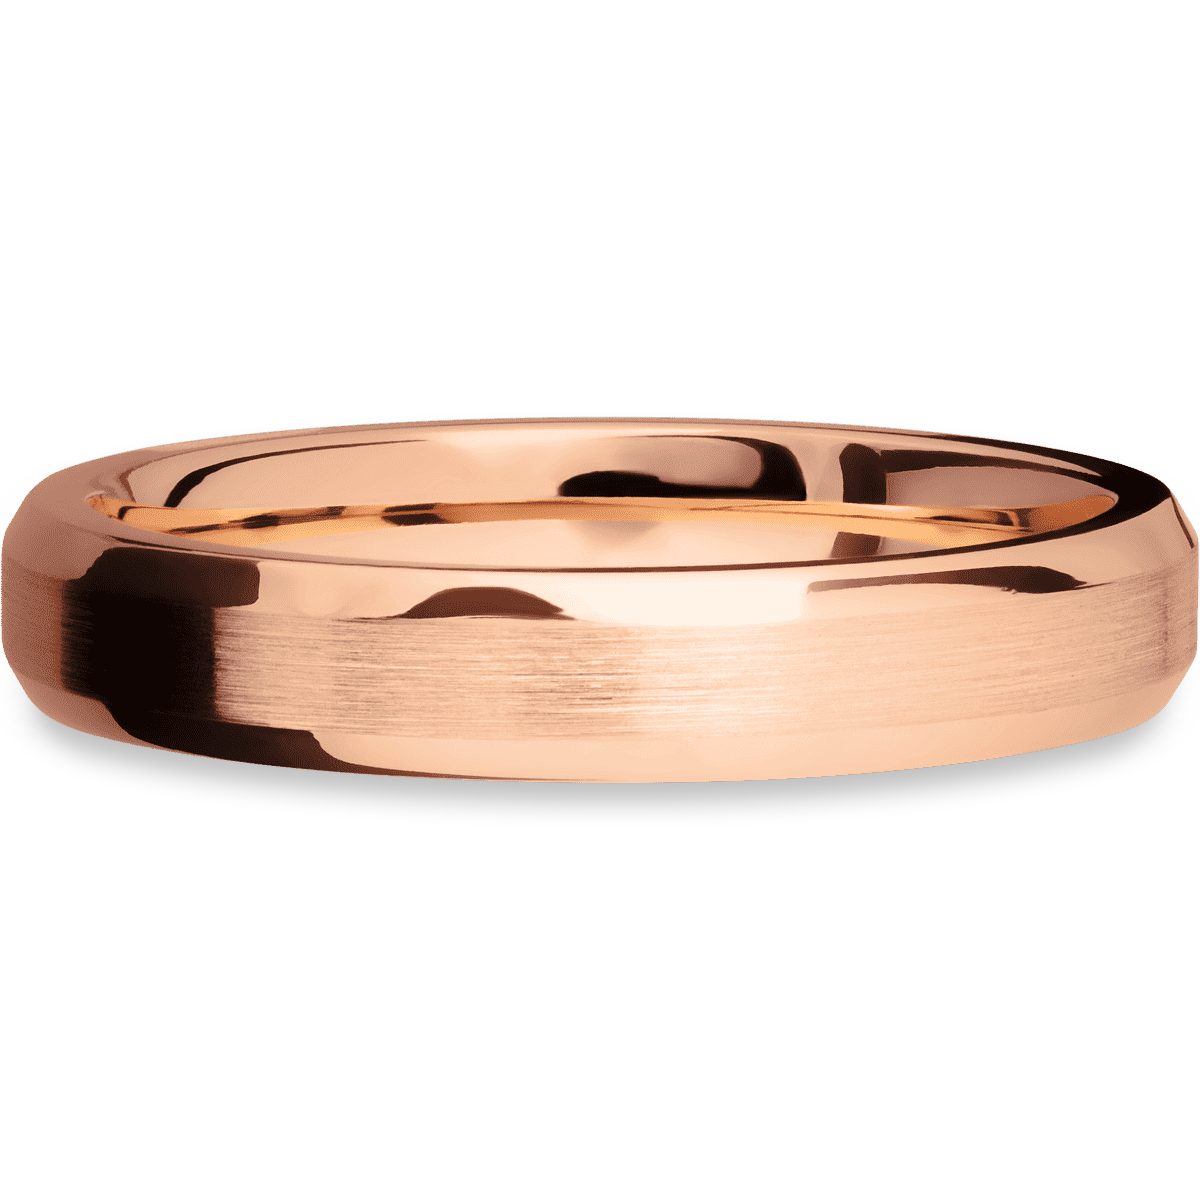 4mm wide beveled 14K rose gold engagement ring with satin finish.